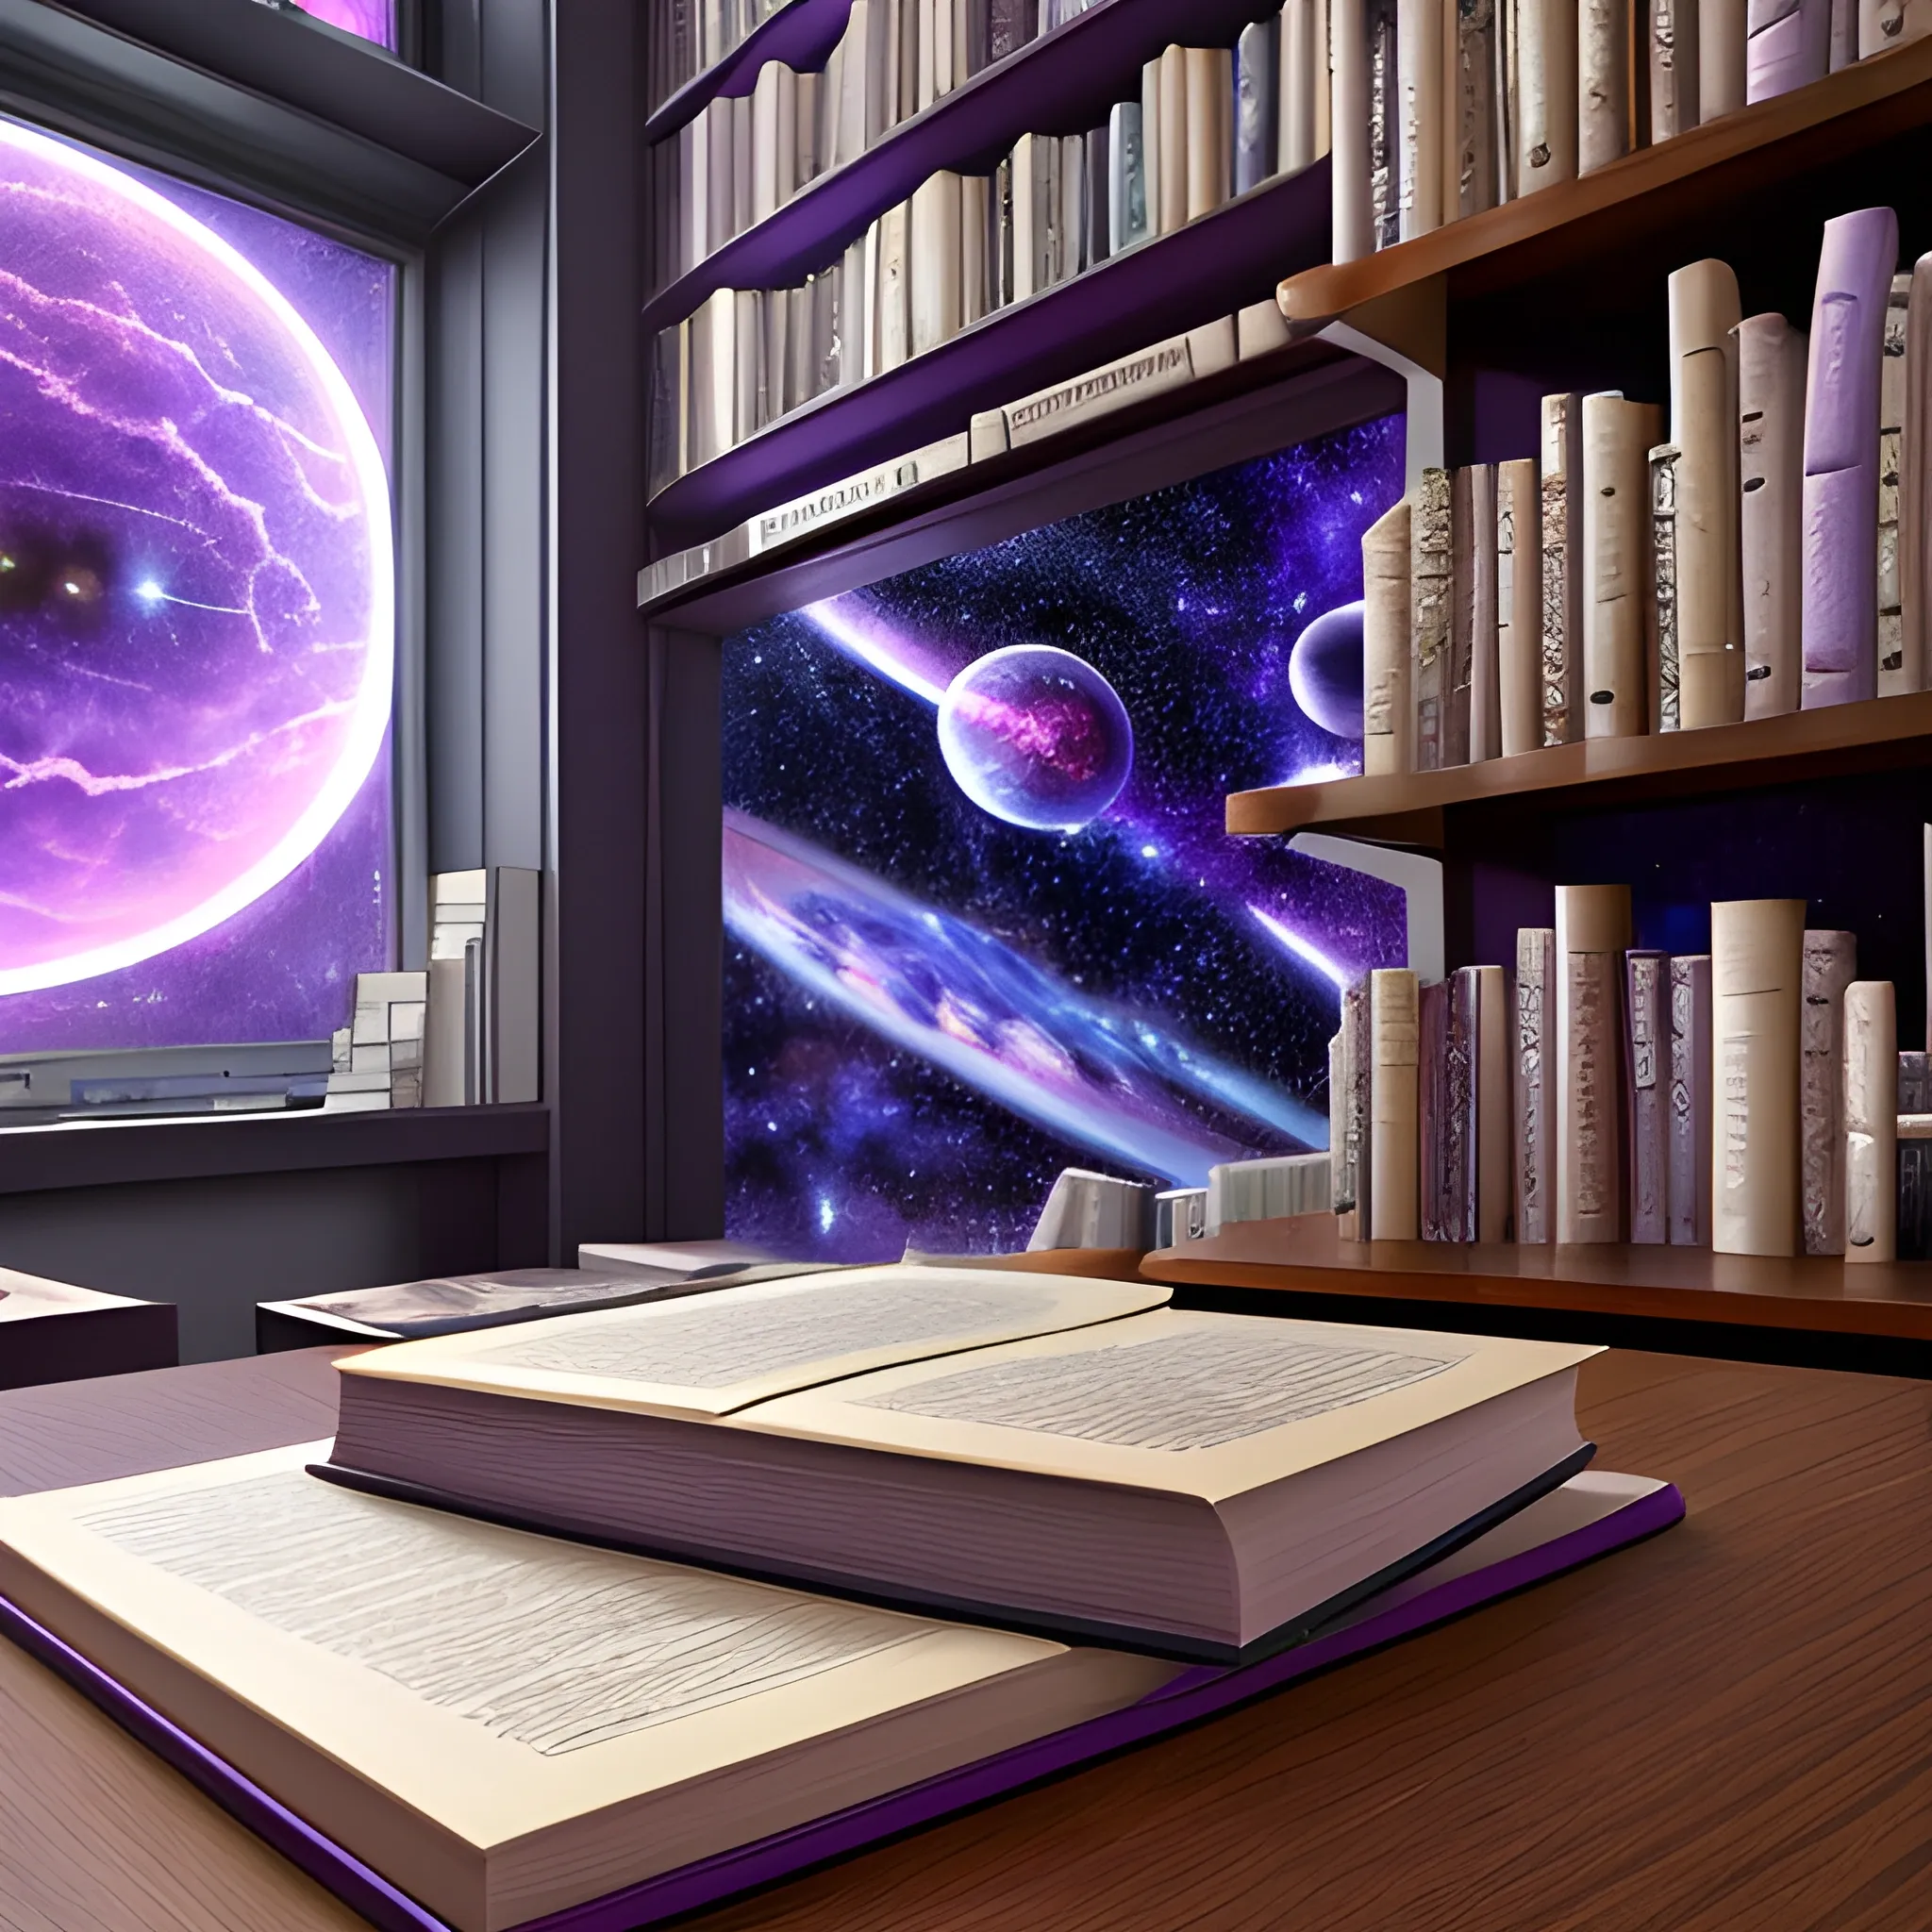 (((high detail))), best quality, (detailed), (high resolution) purple, silver universe, books, books on a table, shelf with some books, studio ghiblin, anime, galaxy in the sky,
